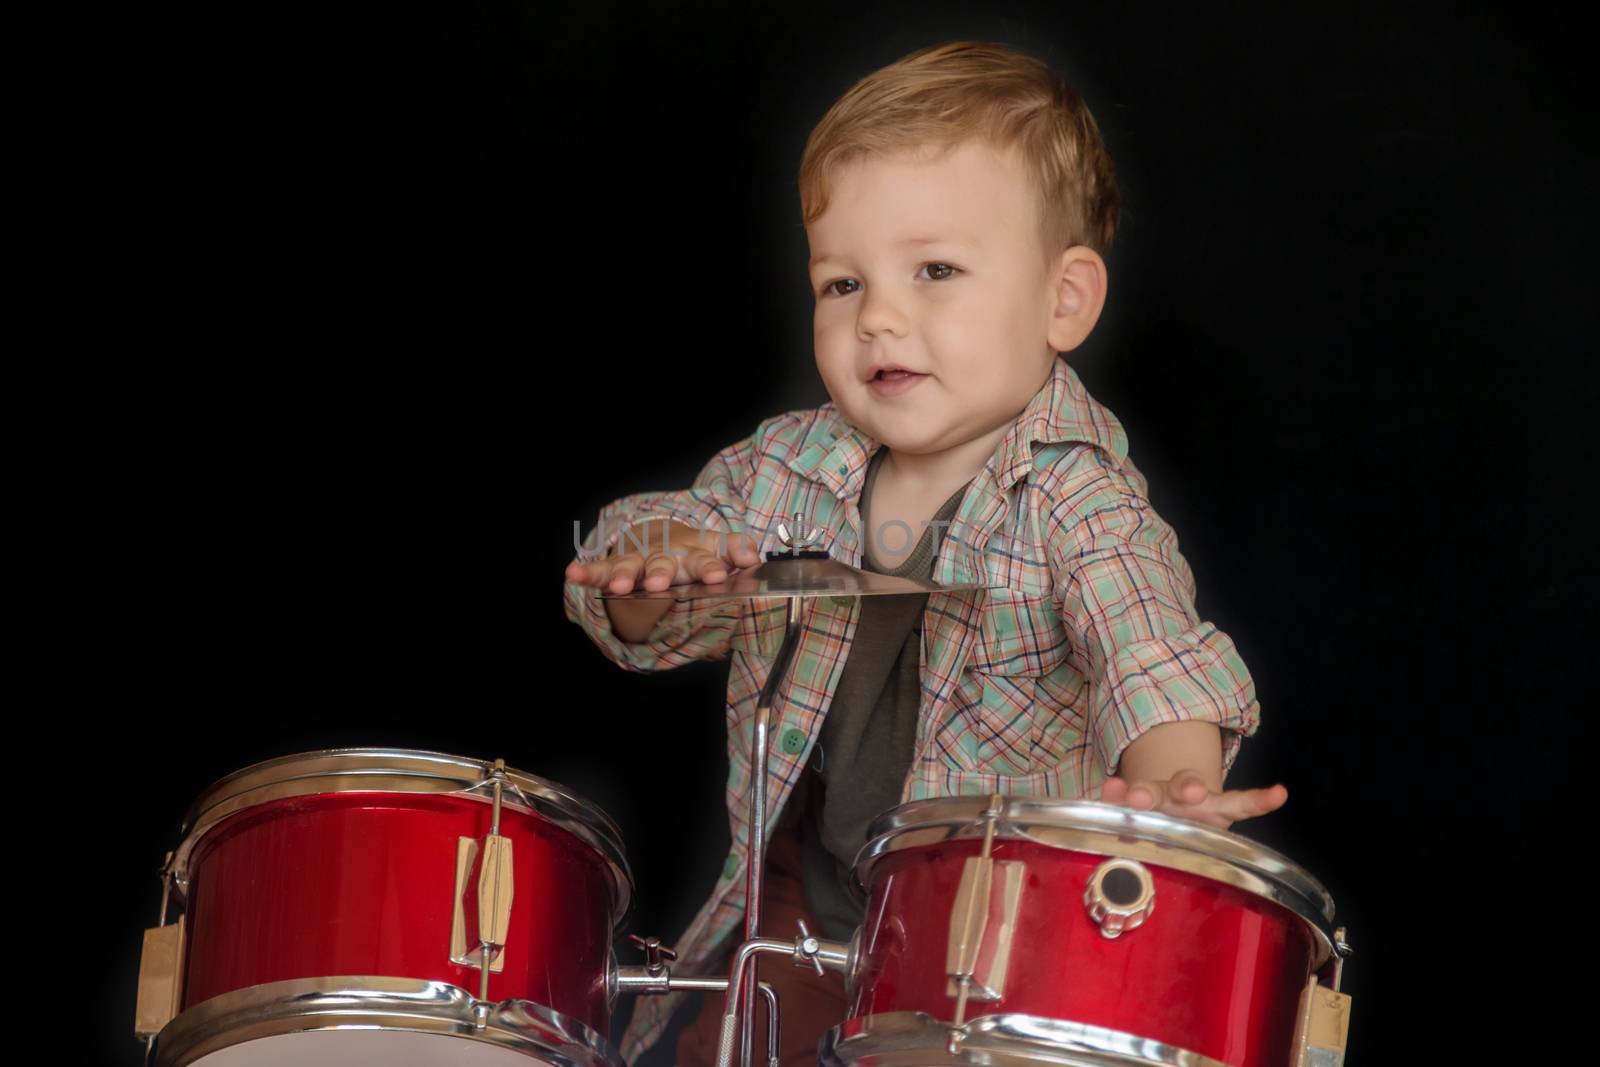 Two year caucasian boy is Playing Drum Set Isolated on Black Background.